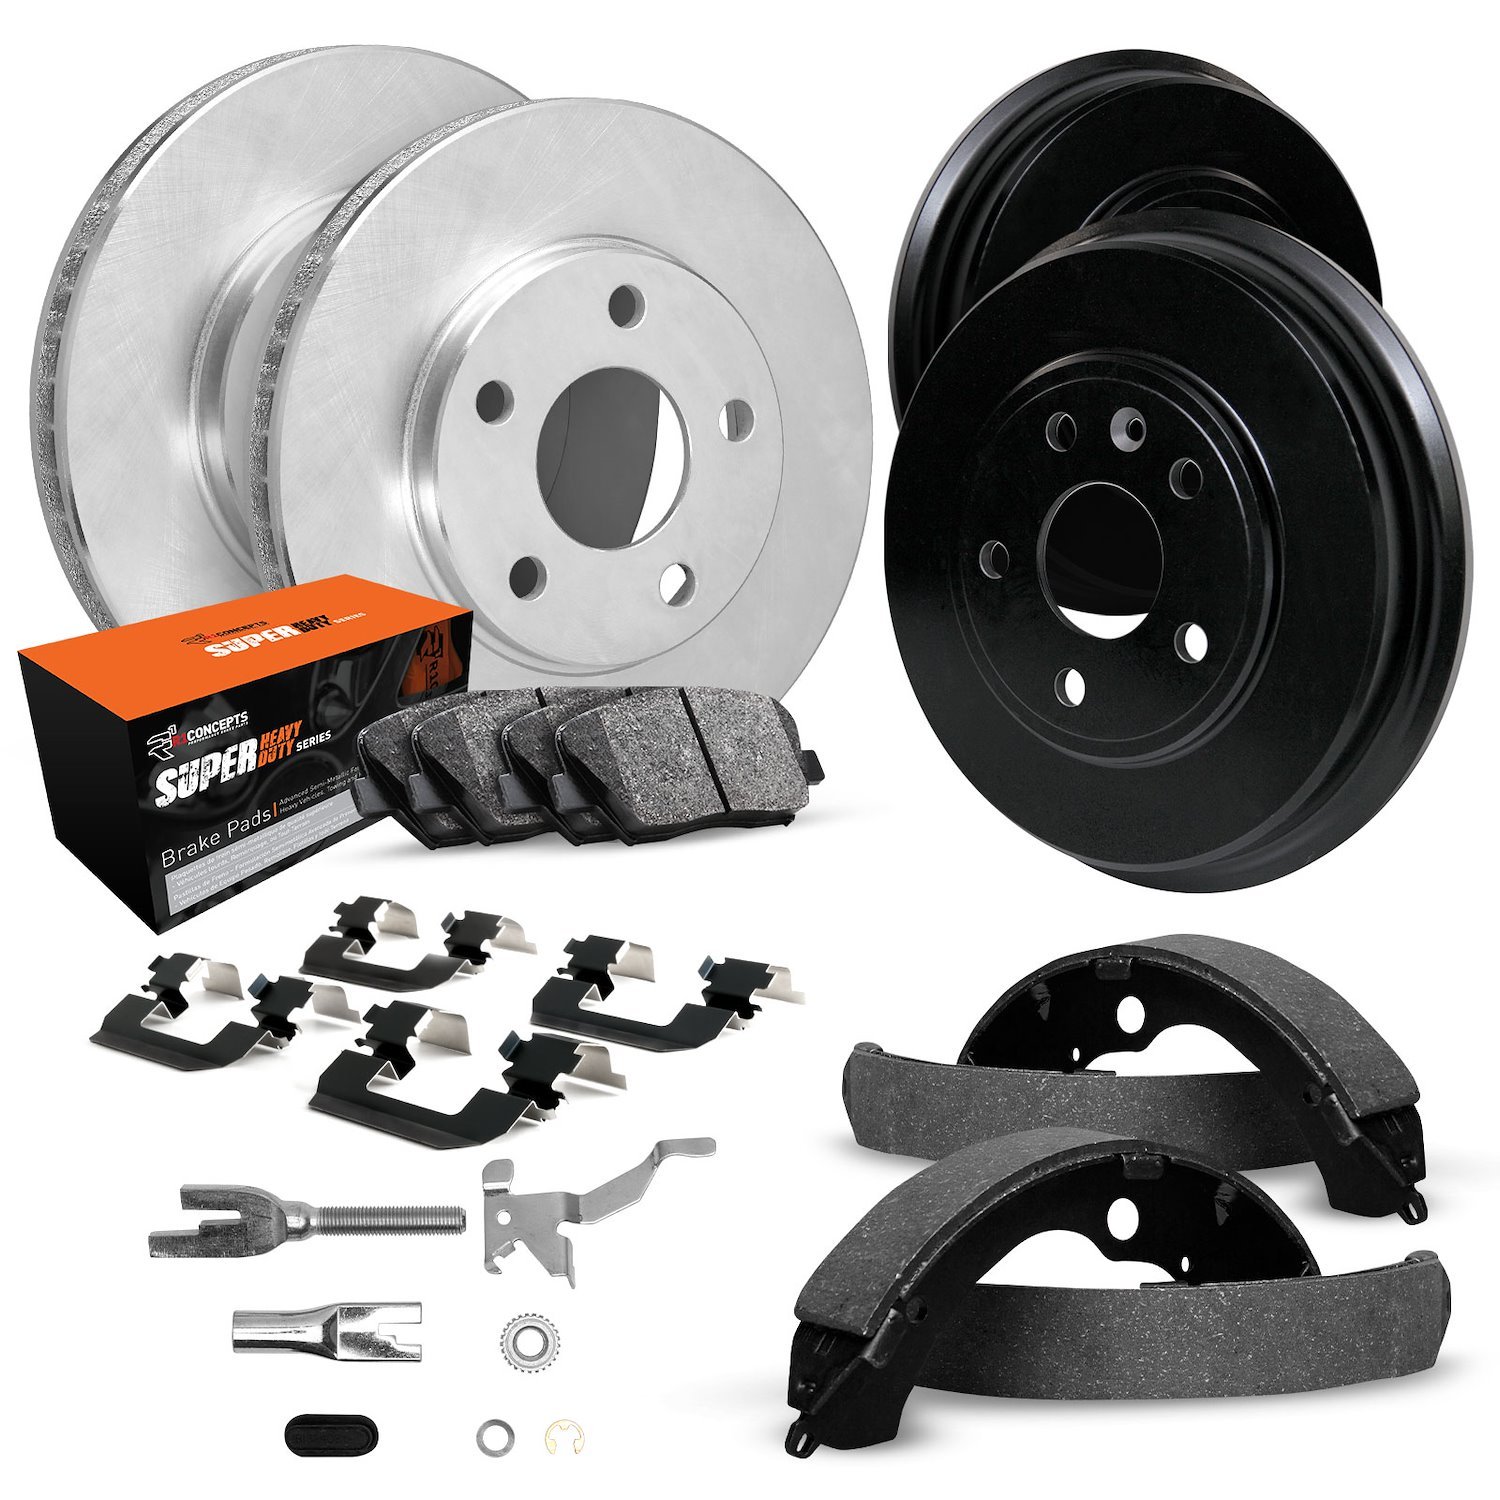 E-Line Blank Brake Rotor & Drum Set w/Super-Duty Pads, Shoes, Hardware, & Adjusters, 1997-2004 Ford/Lincoln/Mercury/Mazda